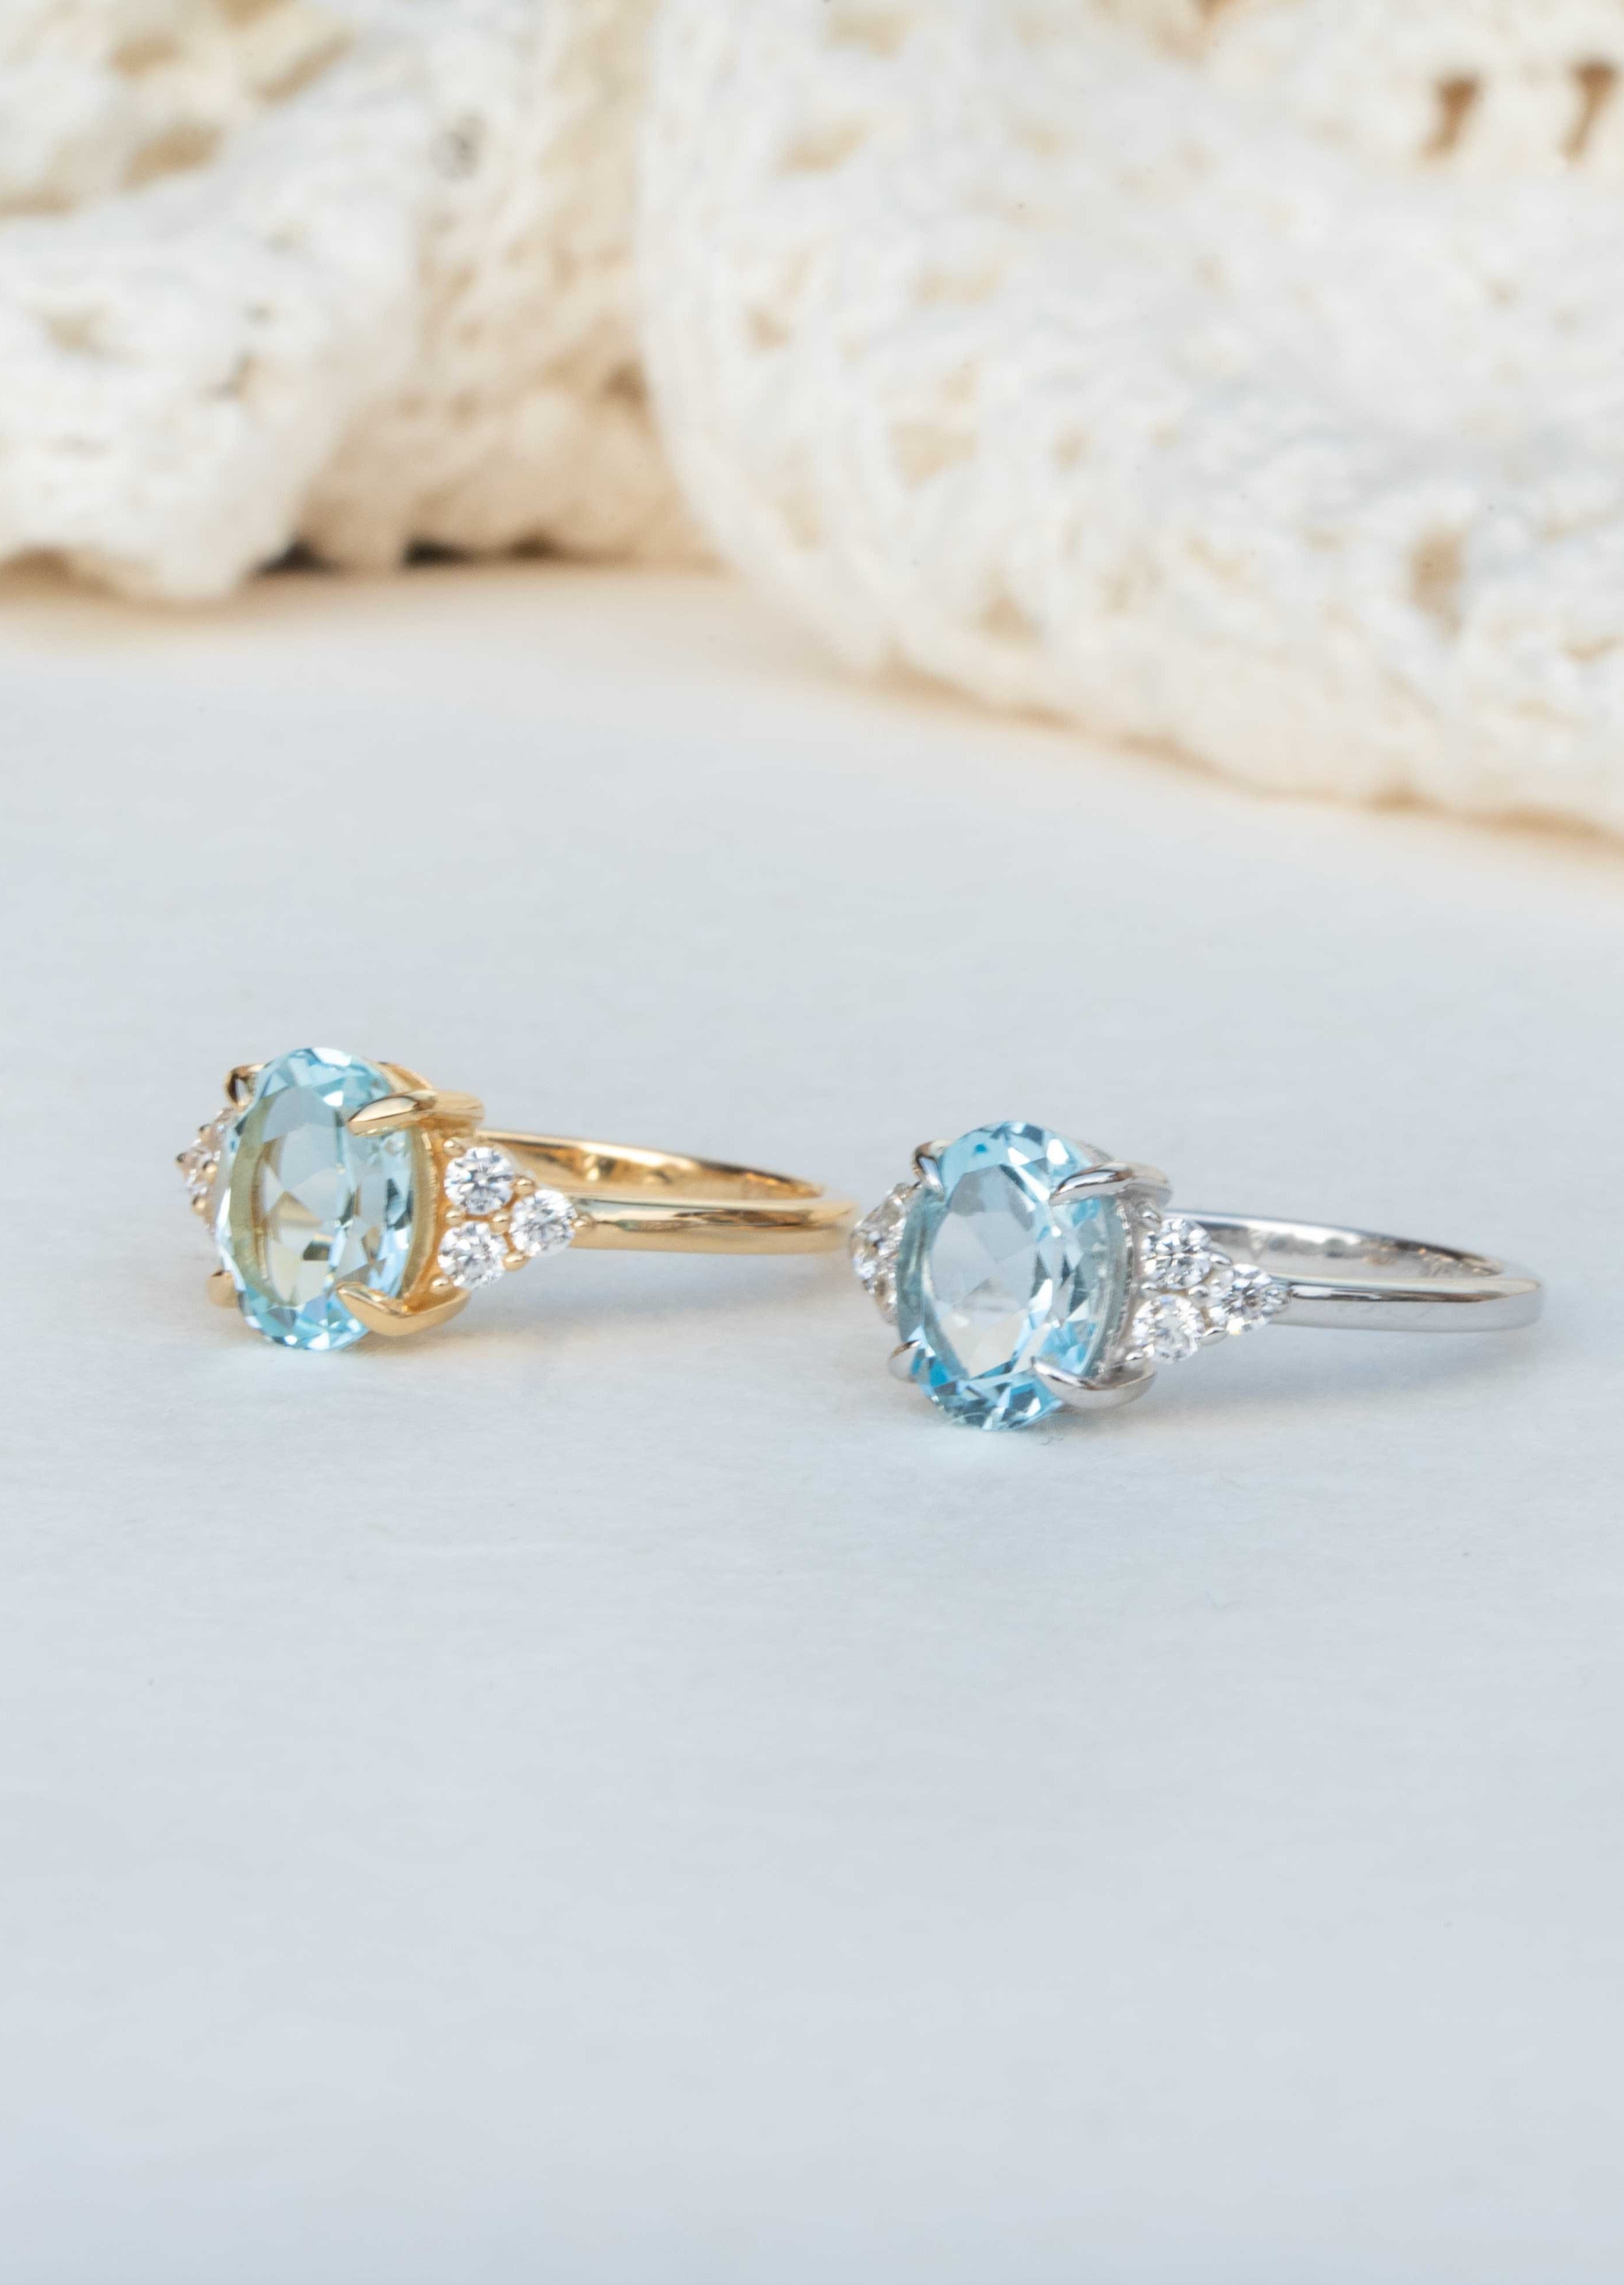 Blue Topaz Ring for Women, Birthday Anniversary Promise Ring Gifts 